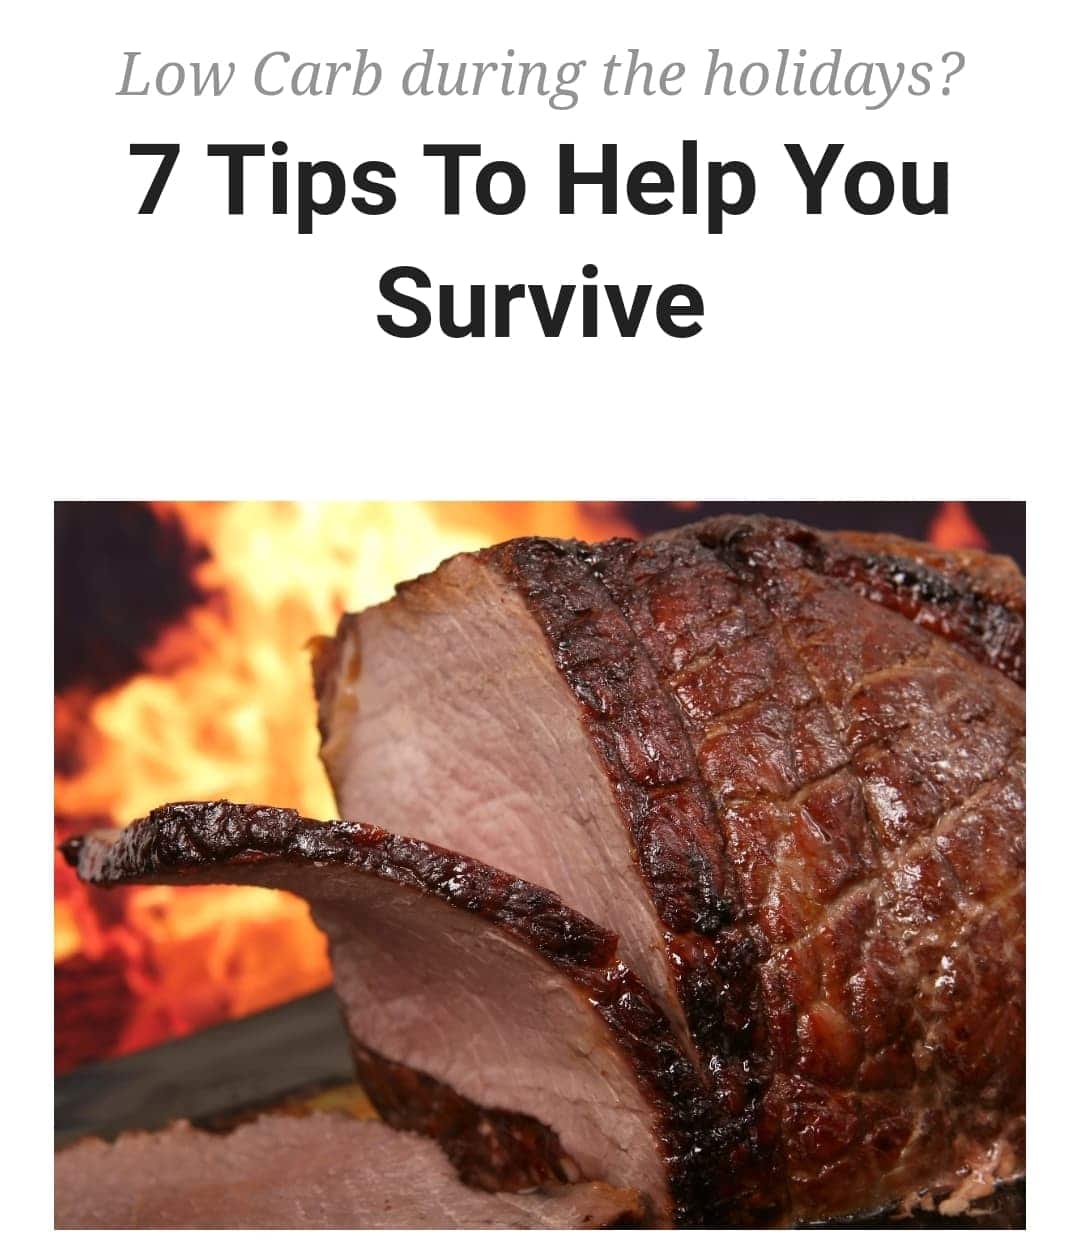 7 Low Carb Tips To Survive The Holidays